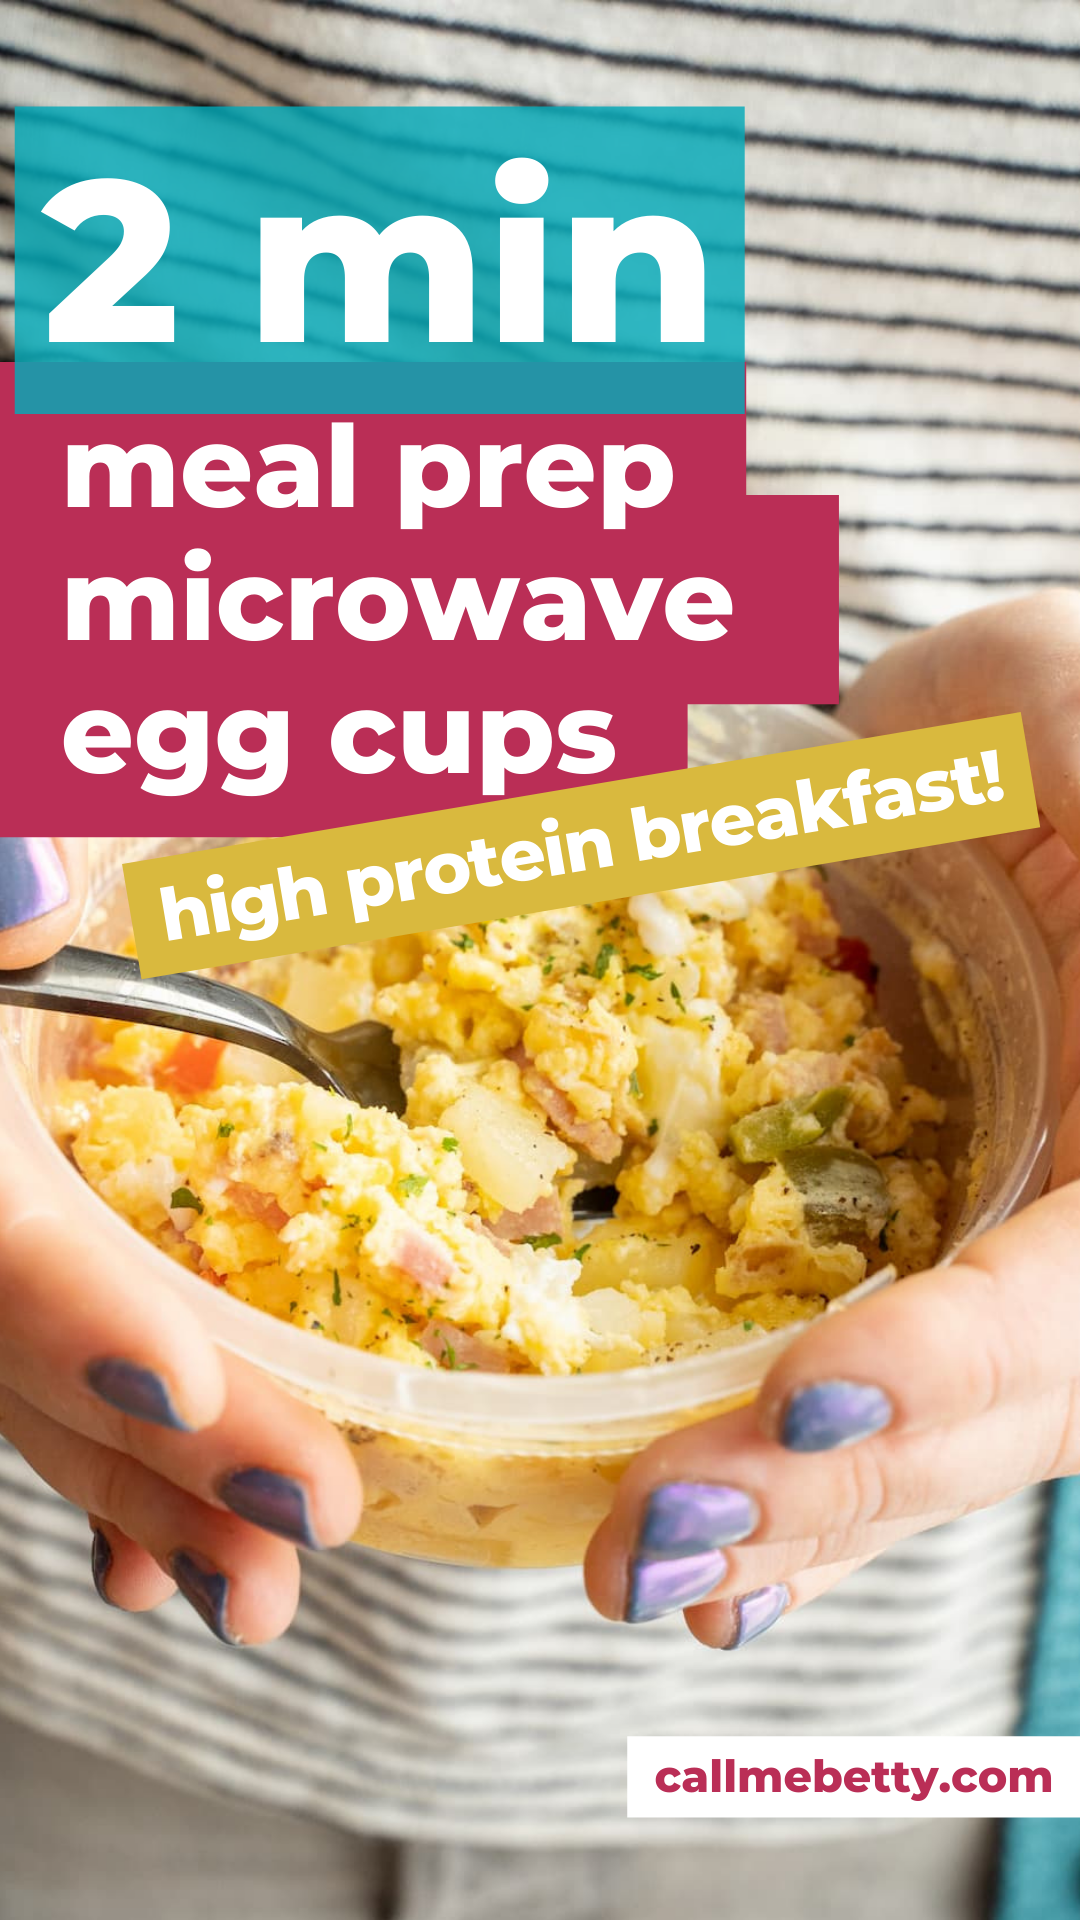 Easy Microwave Egg Muffin Cooker for a Quick and Healthy Breakfast